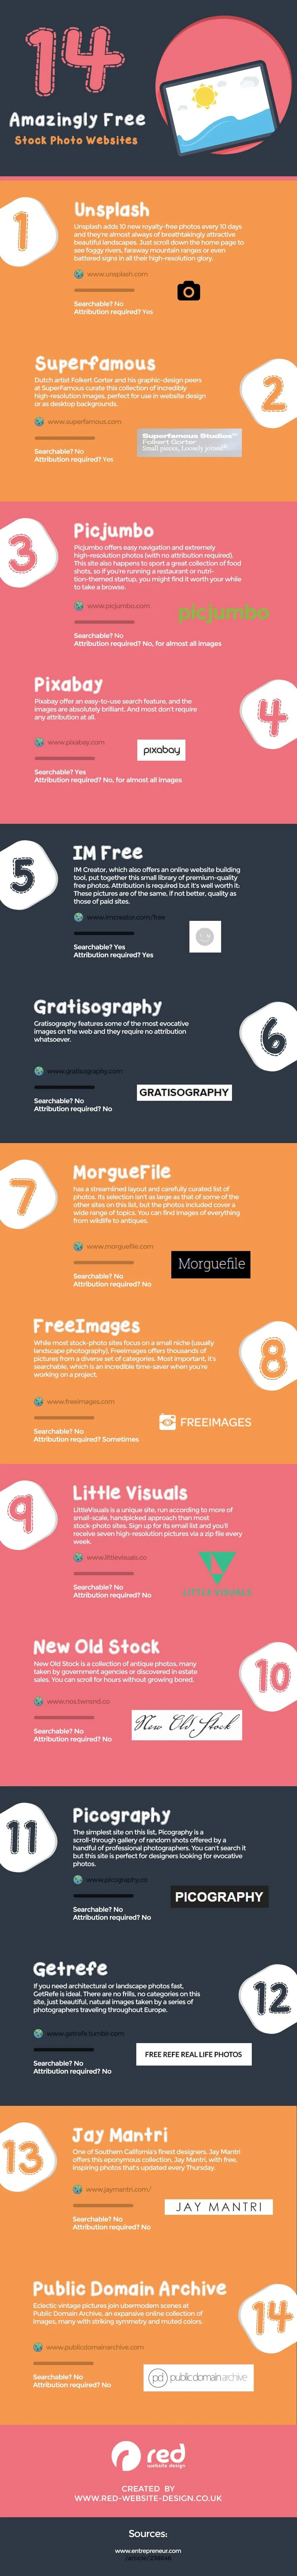 14 Free Stock Image Sites to Find Breathtaking Images for Your Website [Infographic]